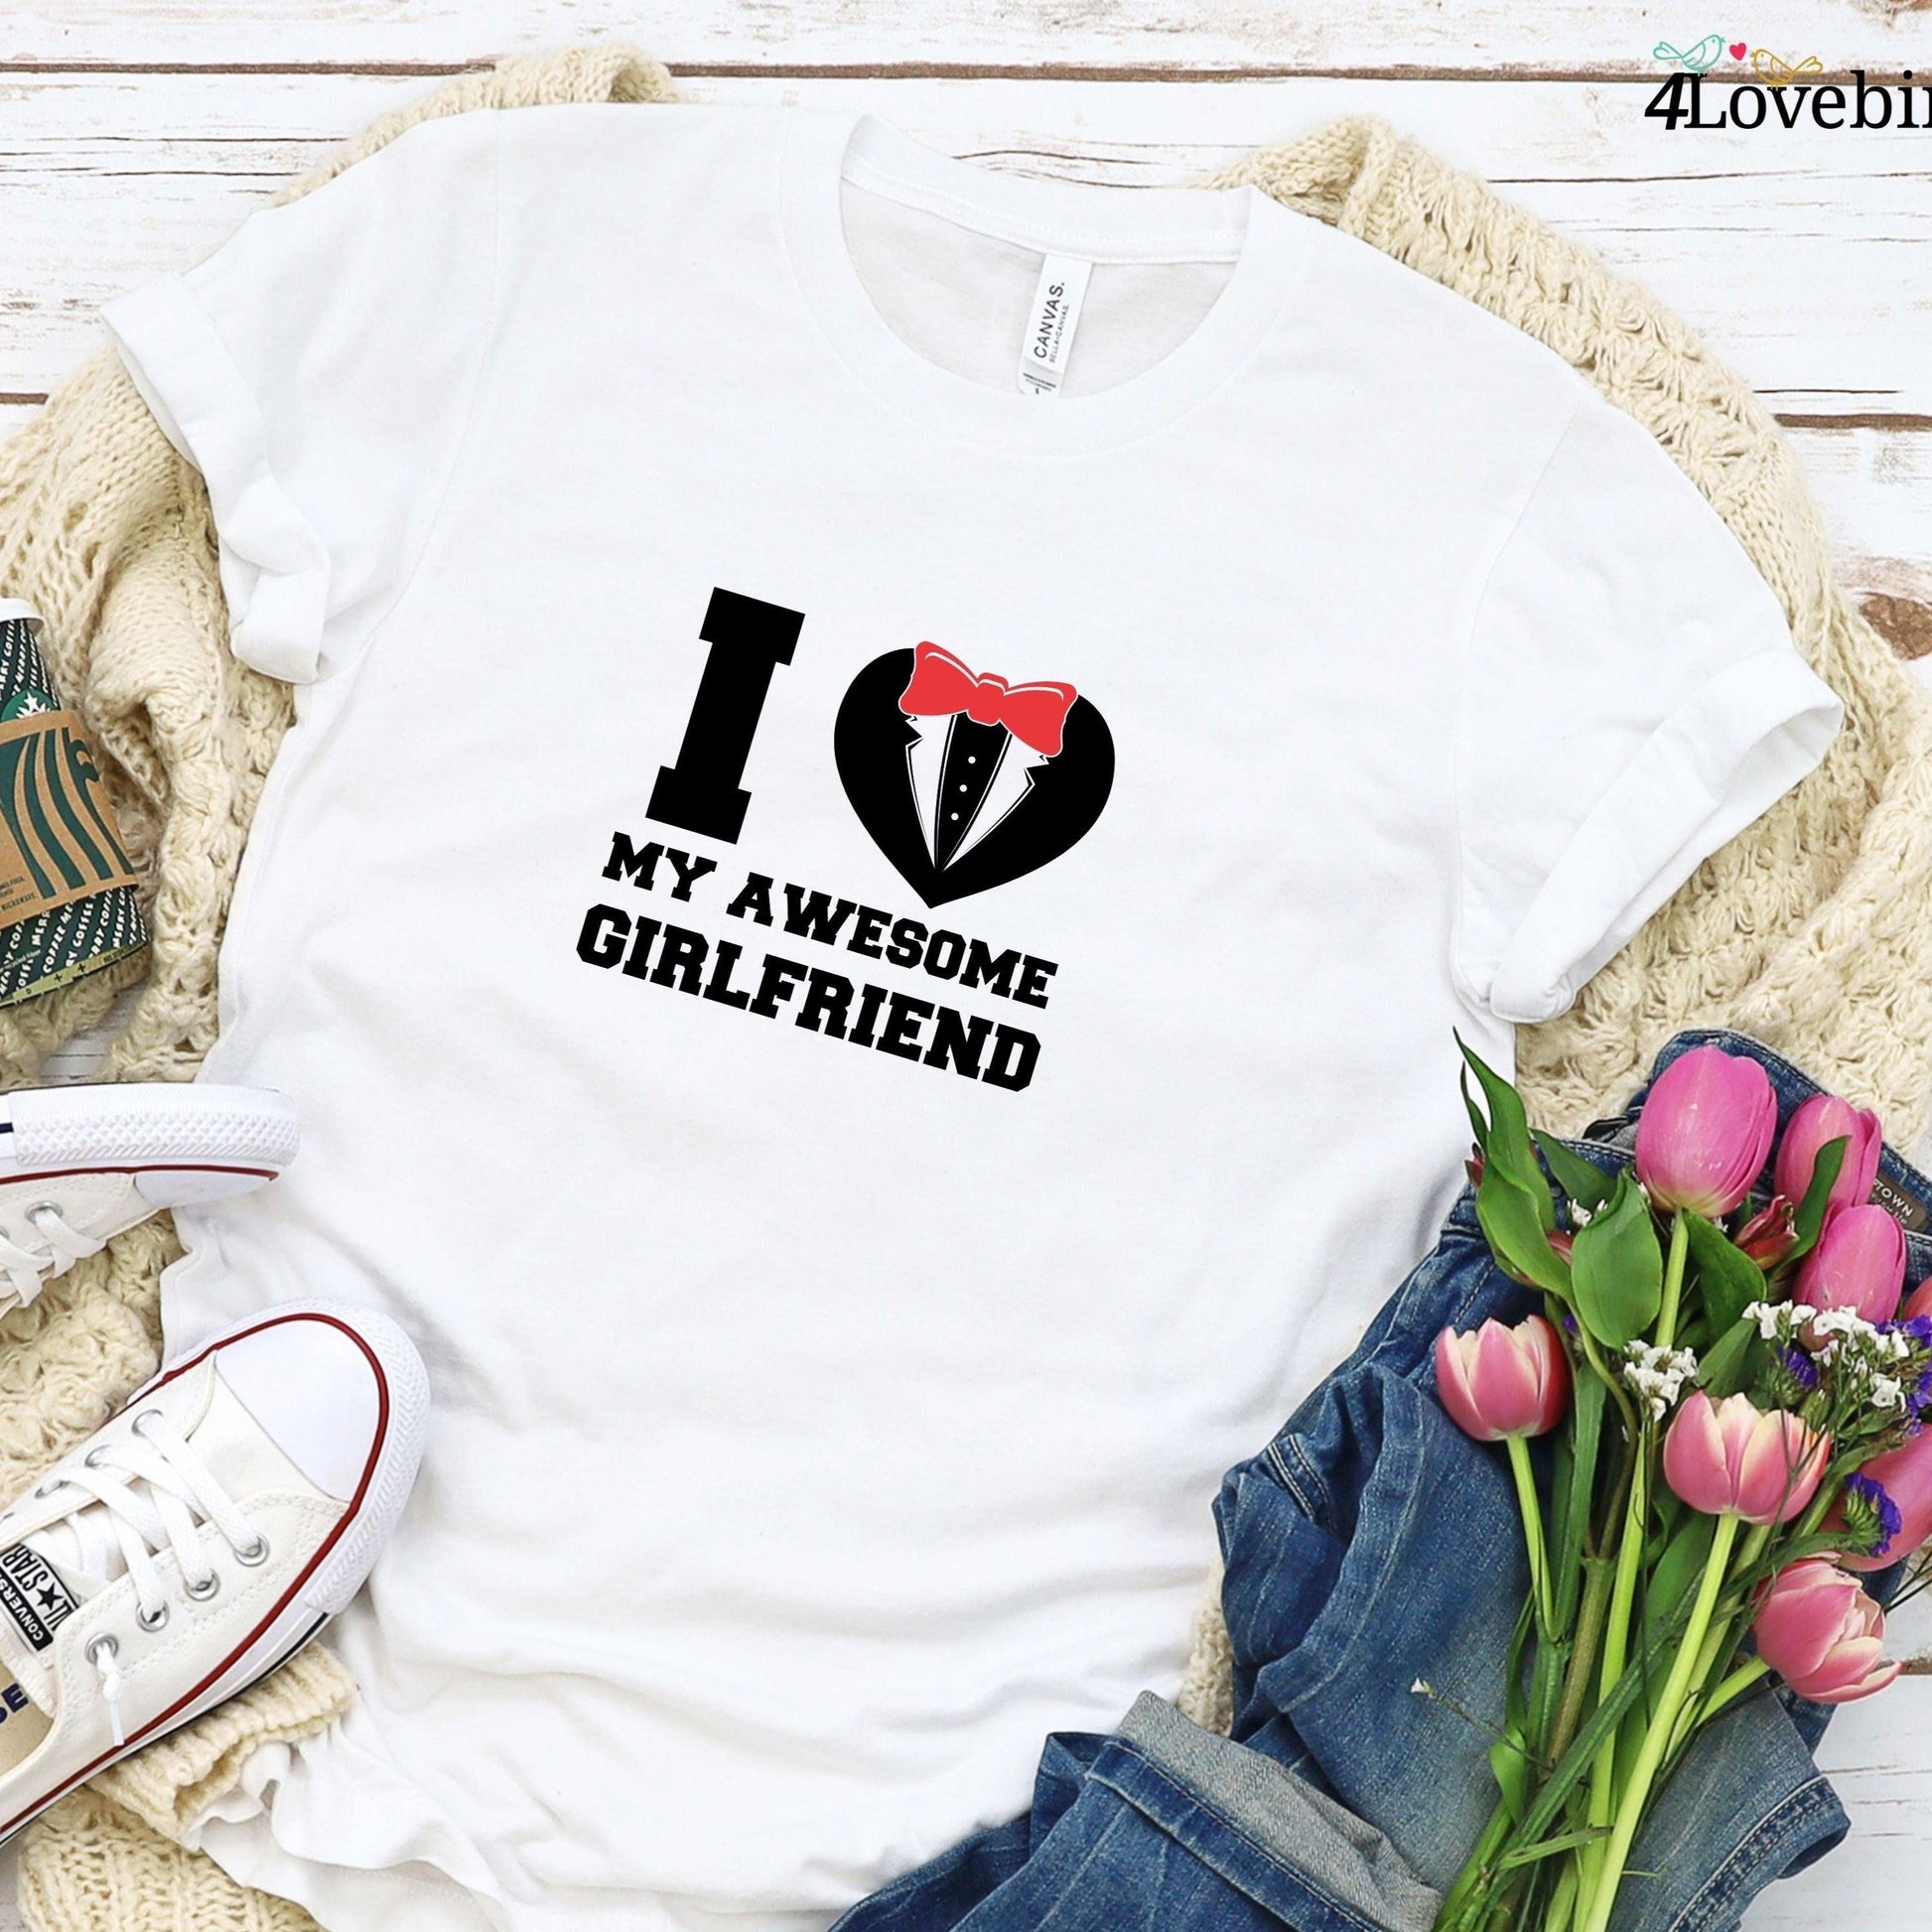 I Love My Awesome Girlfriend & Boyfriend Valentine Matching Set for Couples: Gift for Lovers, Cute Hoodie & T-shirt - 4Lovebirds